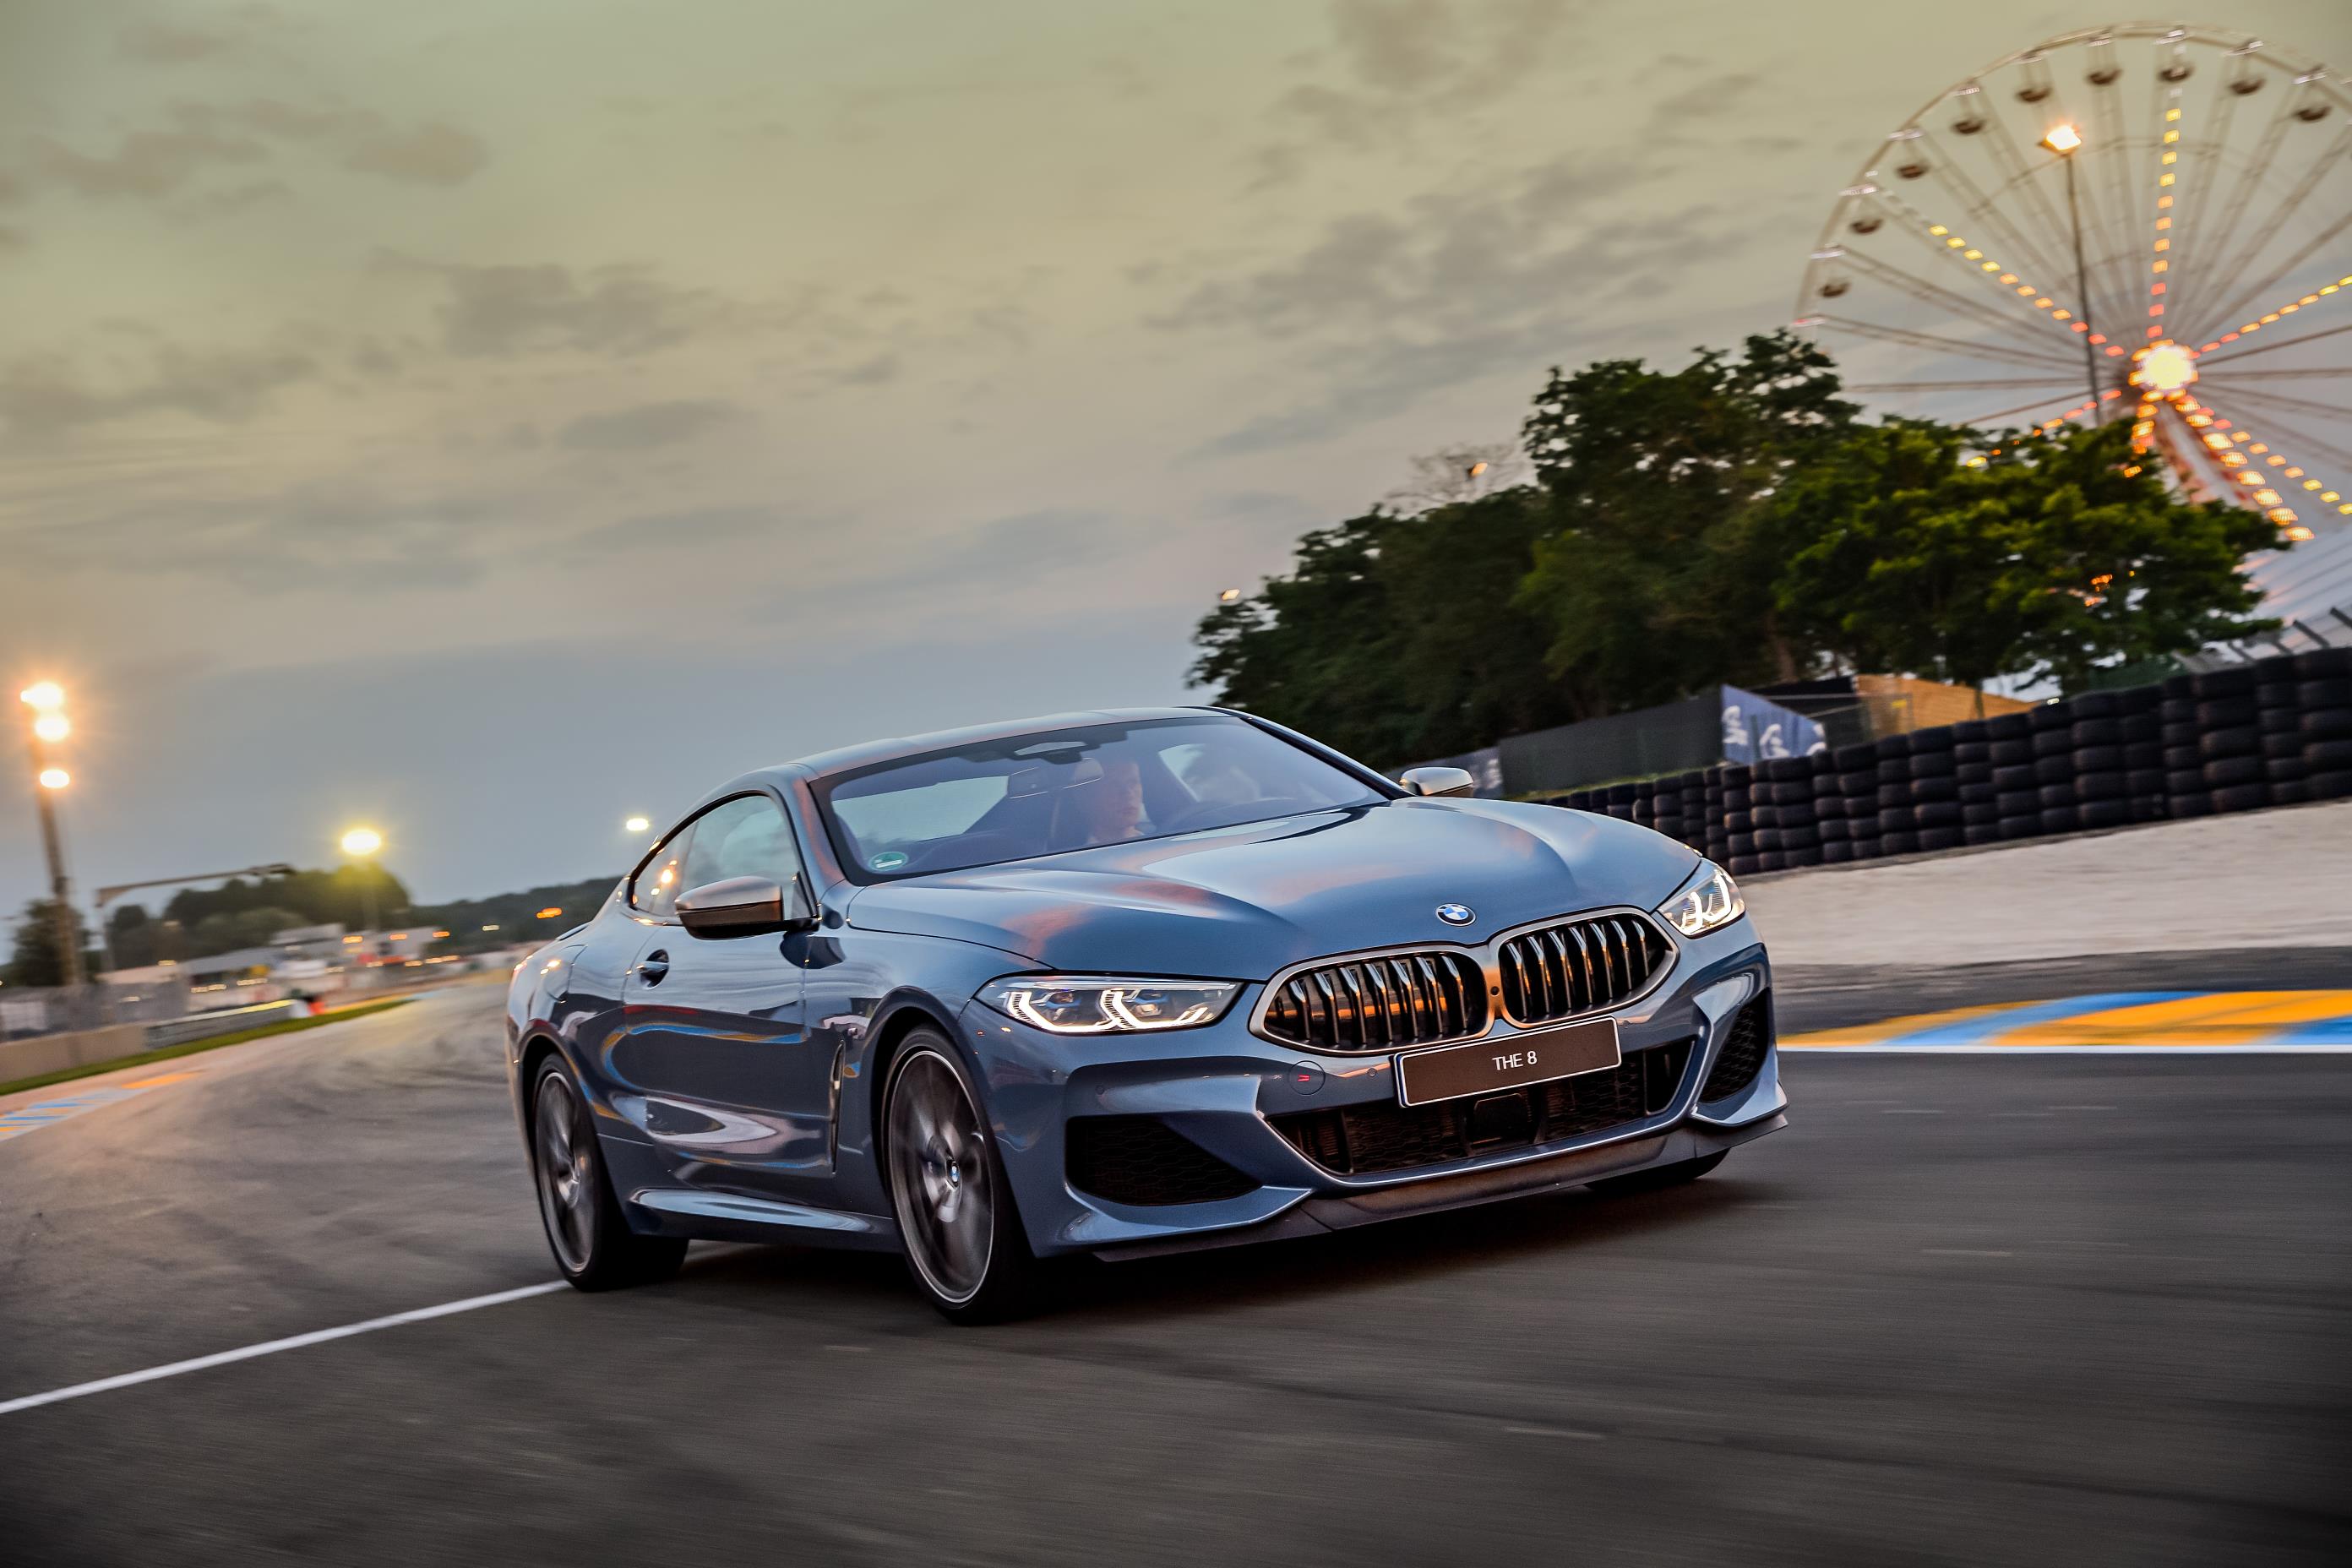 M850I xDrive: We Have an Arrival Date